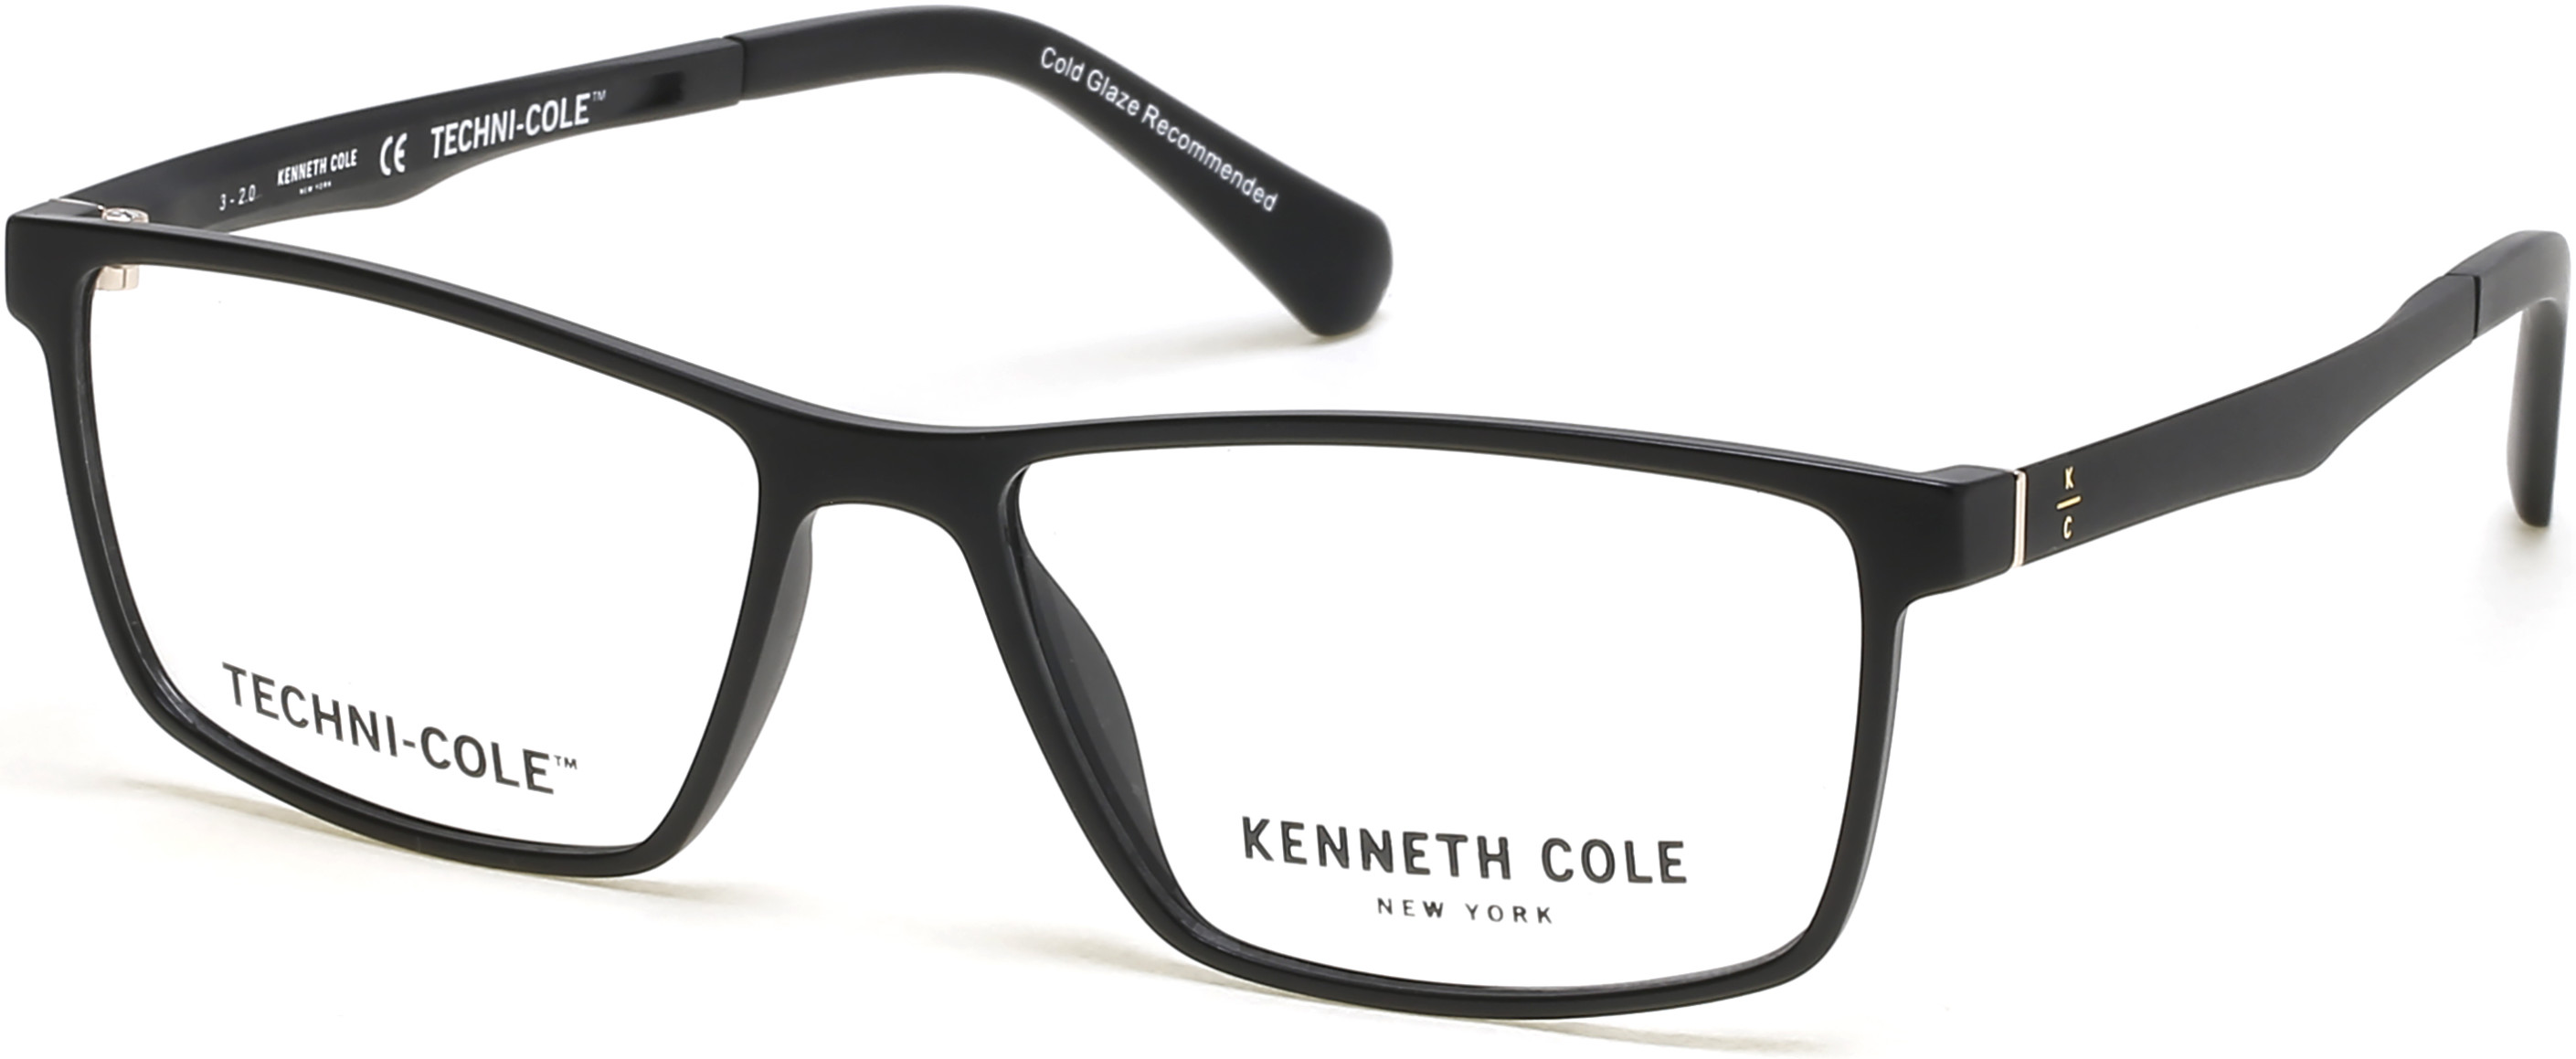 KENNETH COLE NY 0318 002